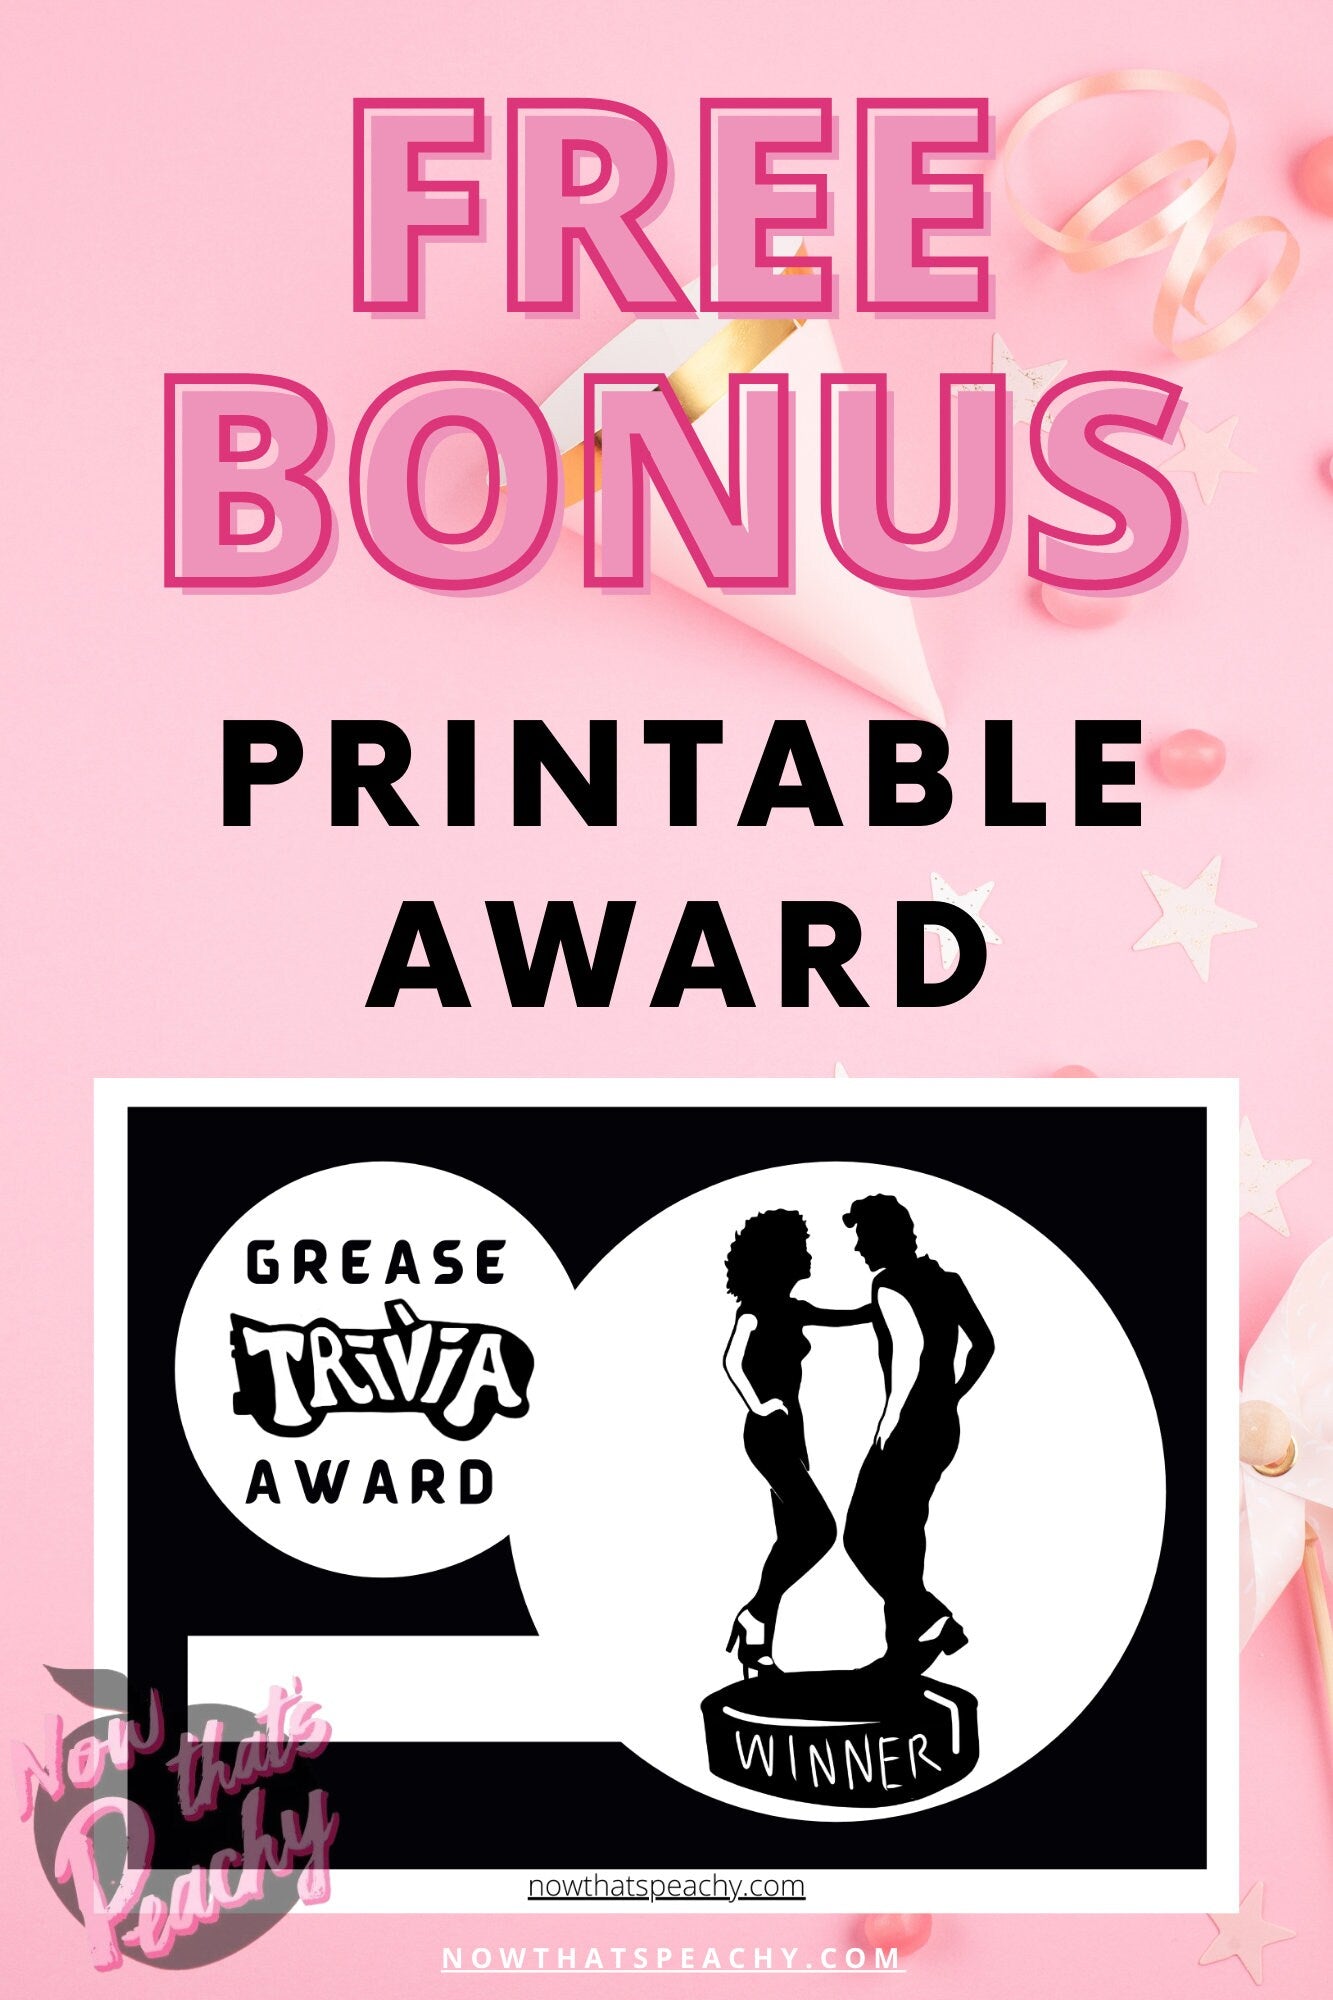 Grease Movie Trivia quiz question game party package 1950s fifties 50's printable template digital instant download edit Danny Sandy T-birds Pink Ladies  invite soda hop jukebox rockabilly rock'n'roll musical movie design black white modern color fun themed bachelorette birthday charity fundraiser event activity